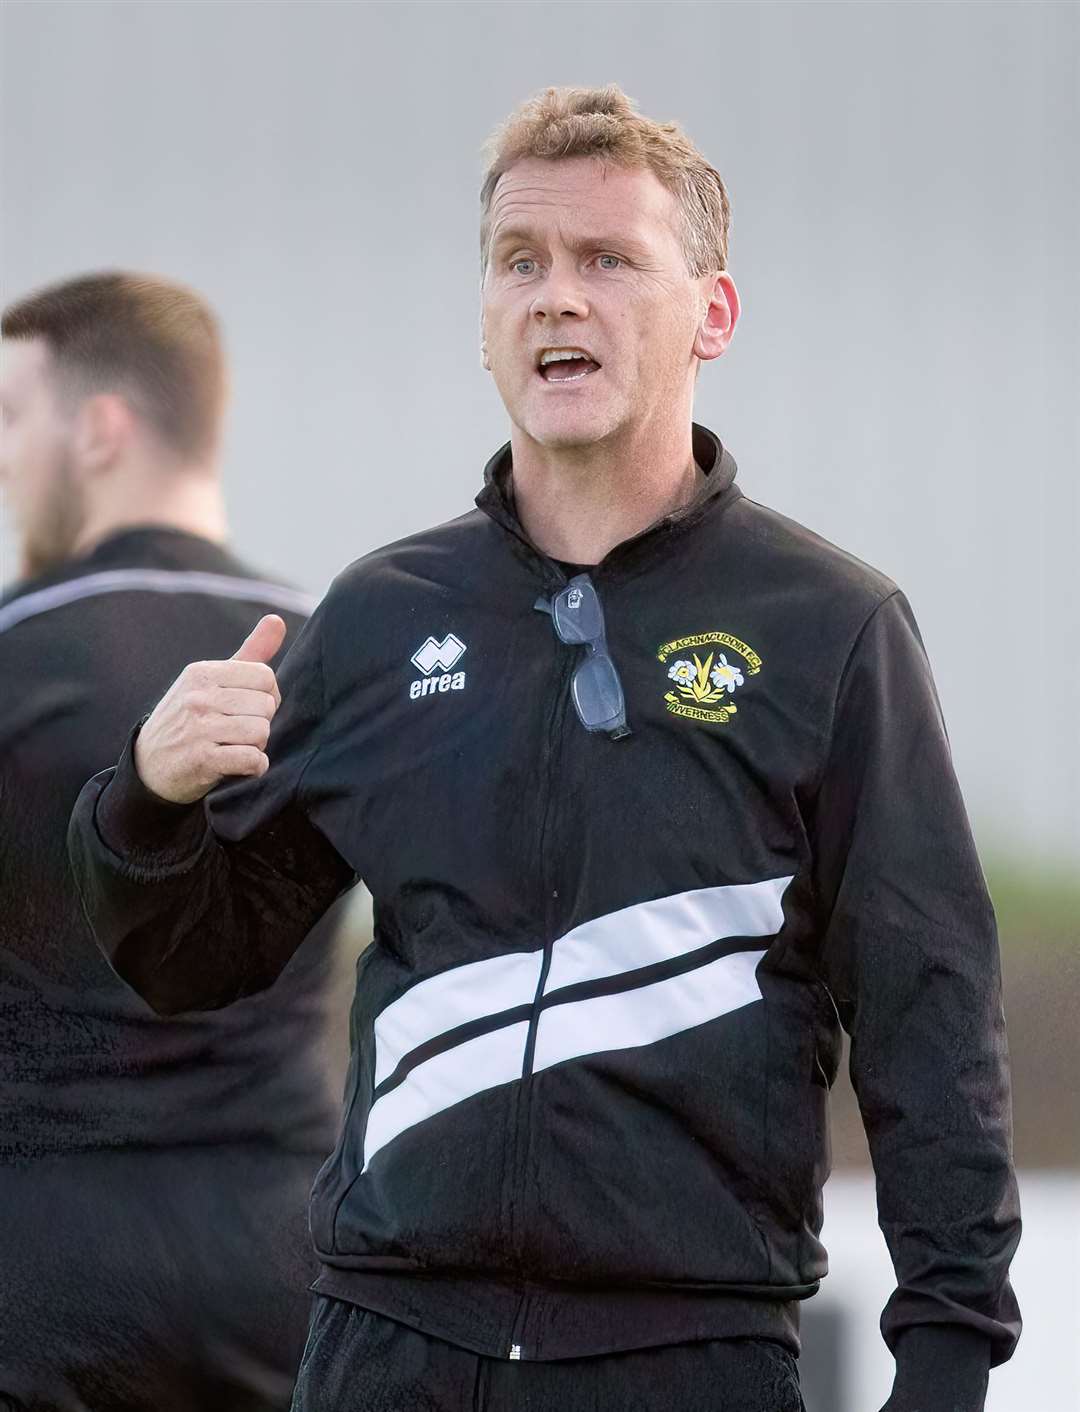 Brian Ritchie has joined Strathspey Thistle after several years with Clachnacuddin. Photo: Noremacpix